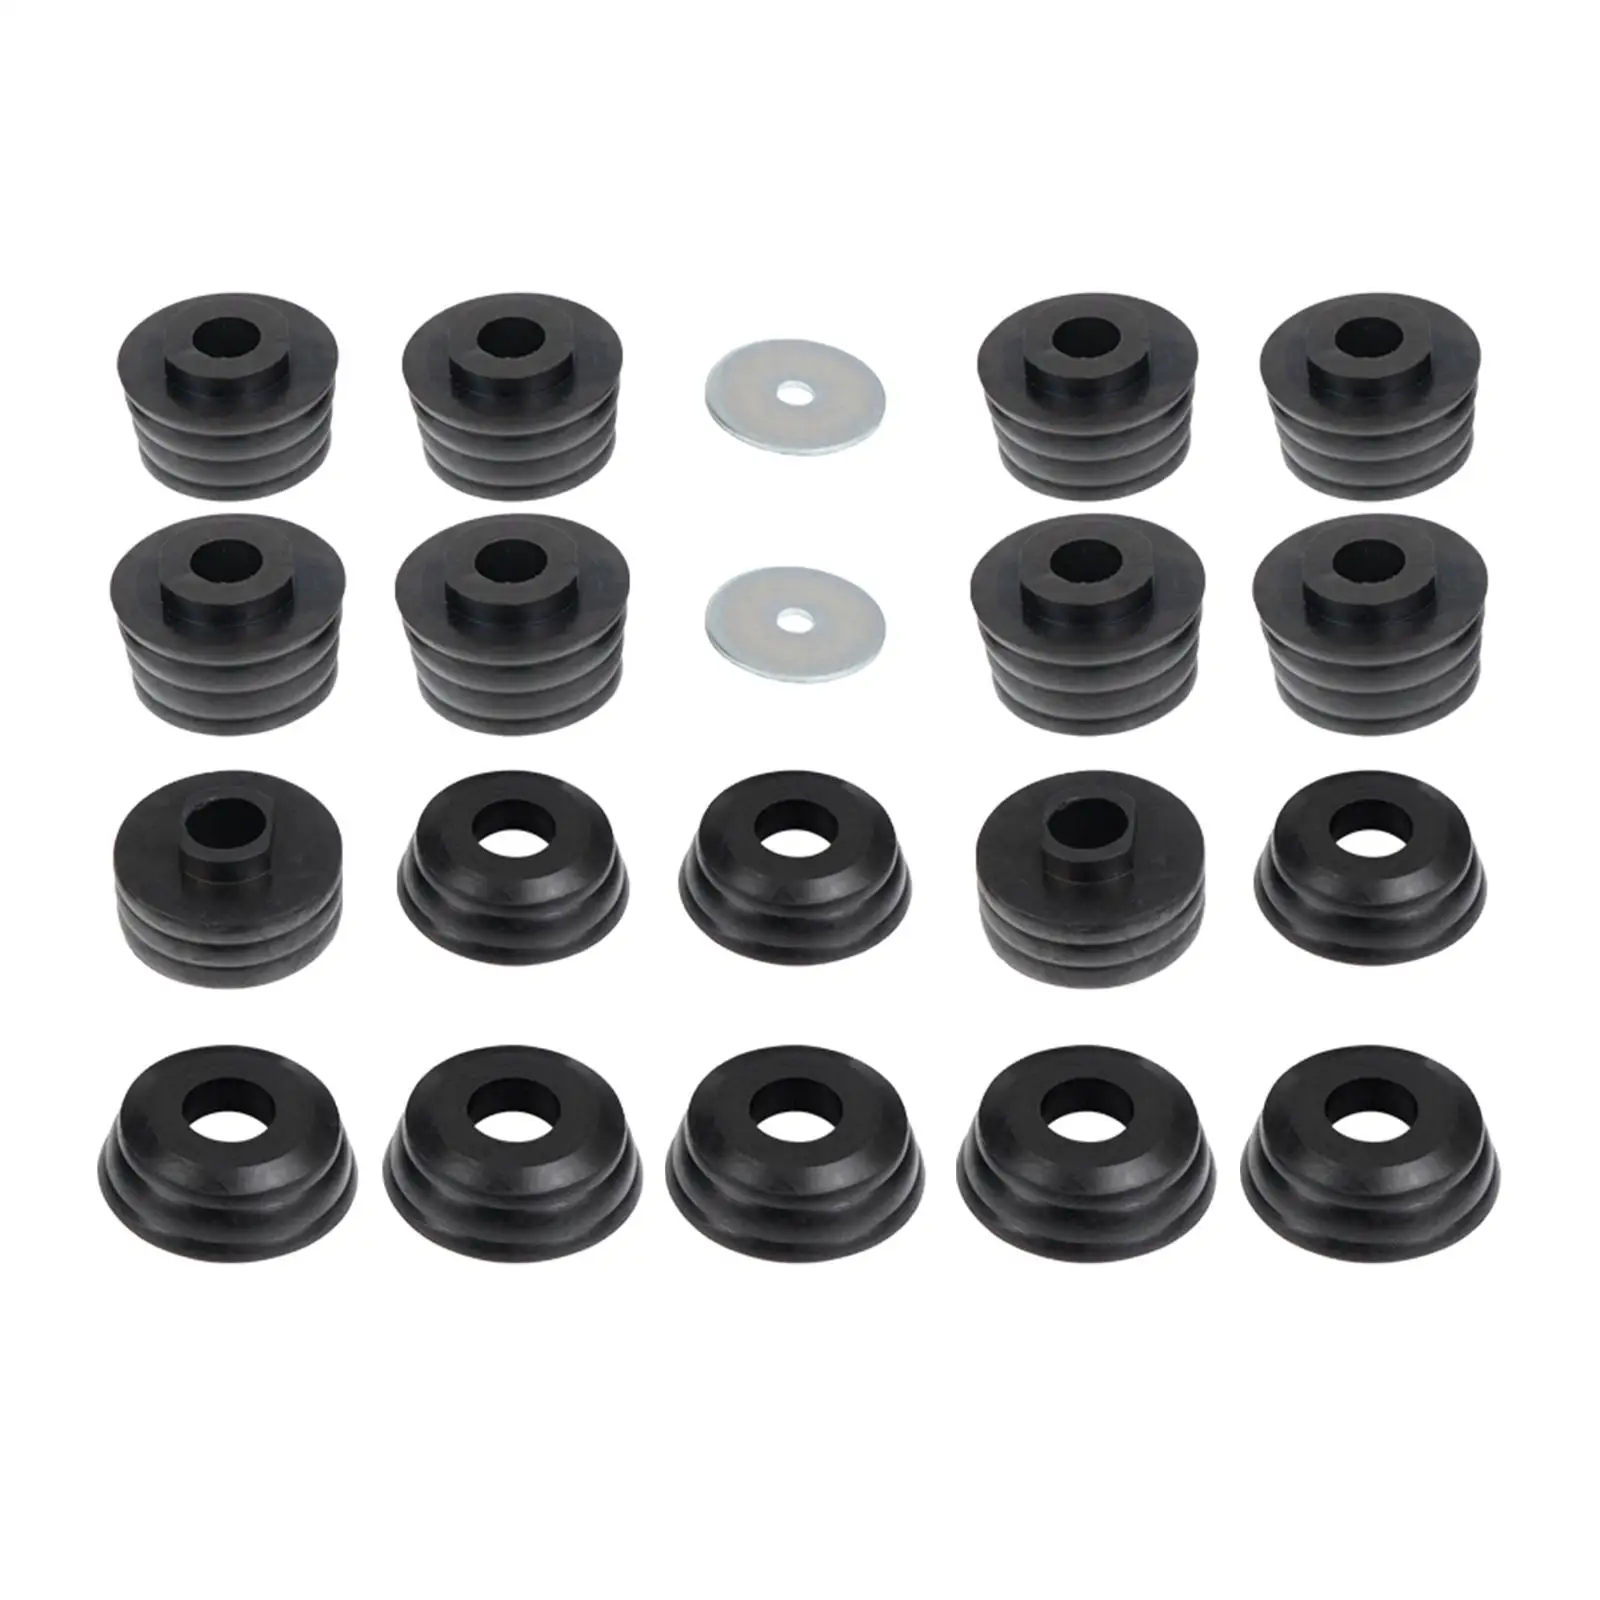 Body Cab Mount Bushing Set Car Body Cab Mounts for GMC Sierra 1500 2500 2WD 4WD 1999-2014 Accessories Upgrade Replacement